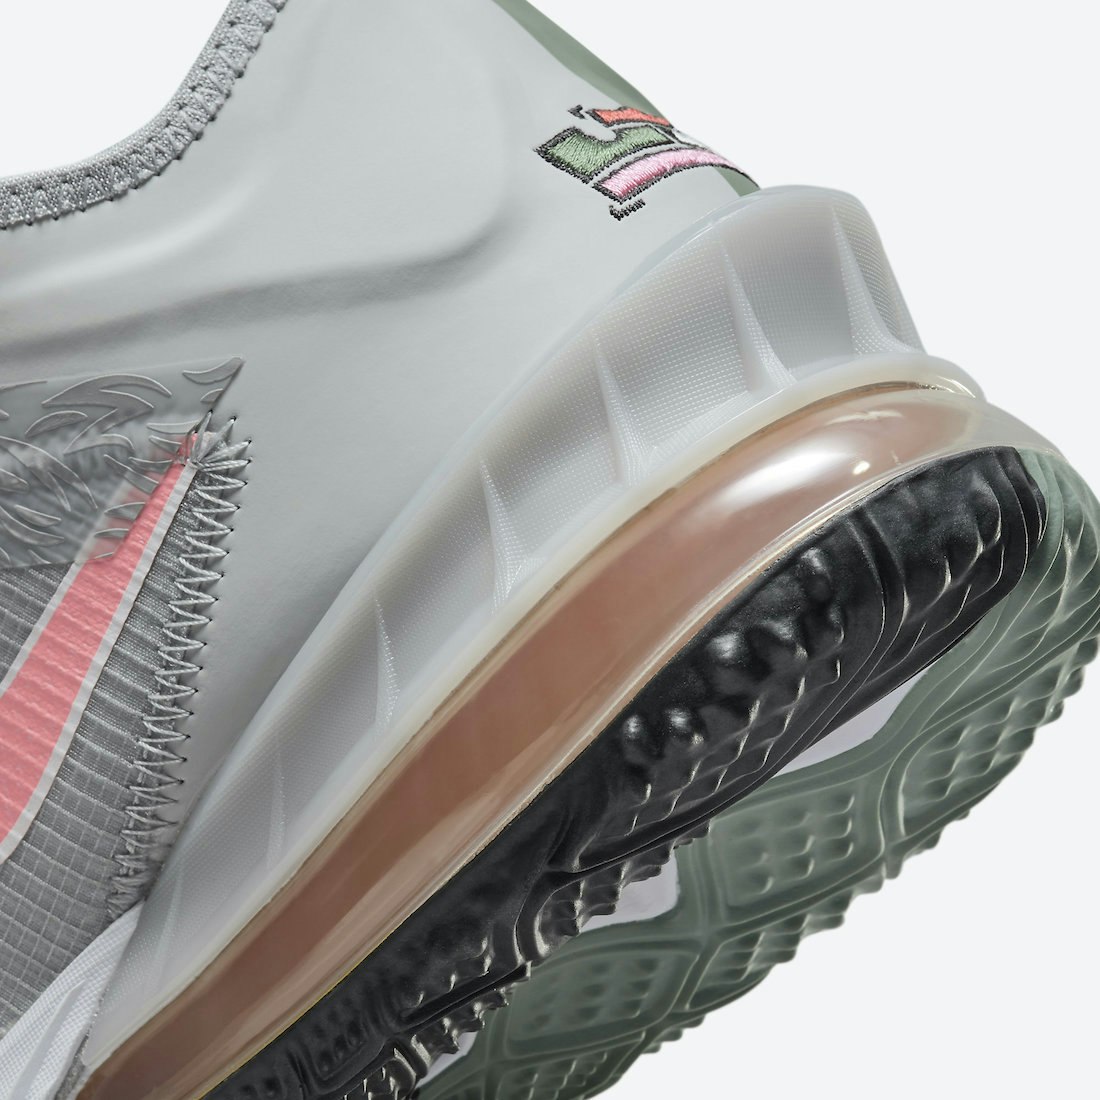 Space Jam x Nike LeBron 18 Low “Bugs Bunny x Marvin The Martian”